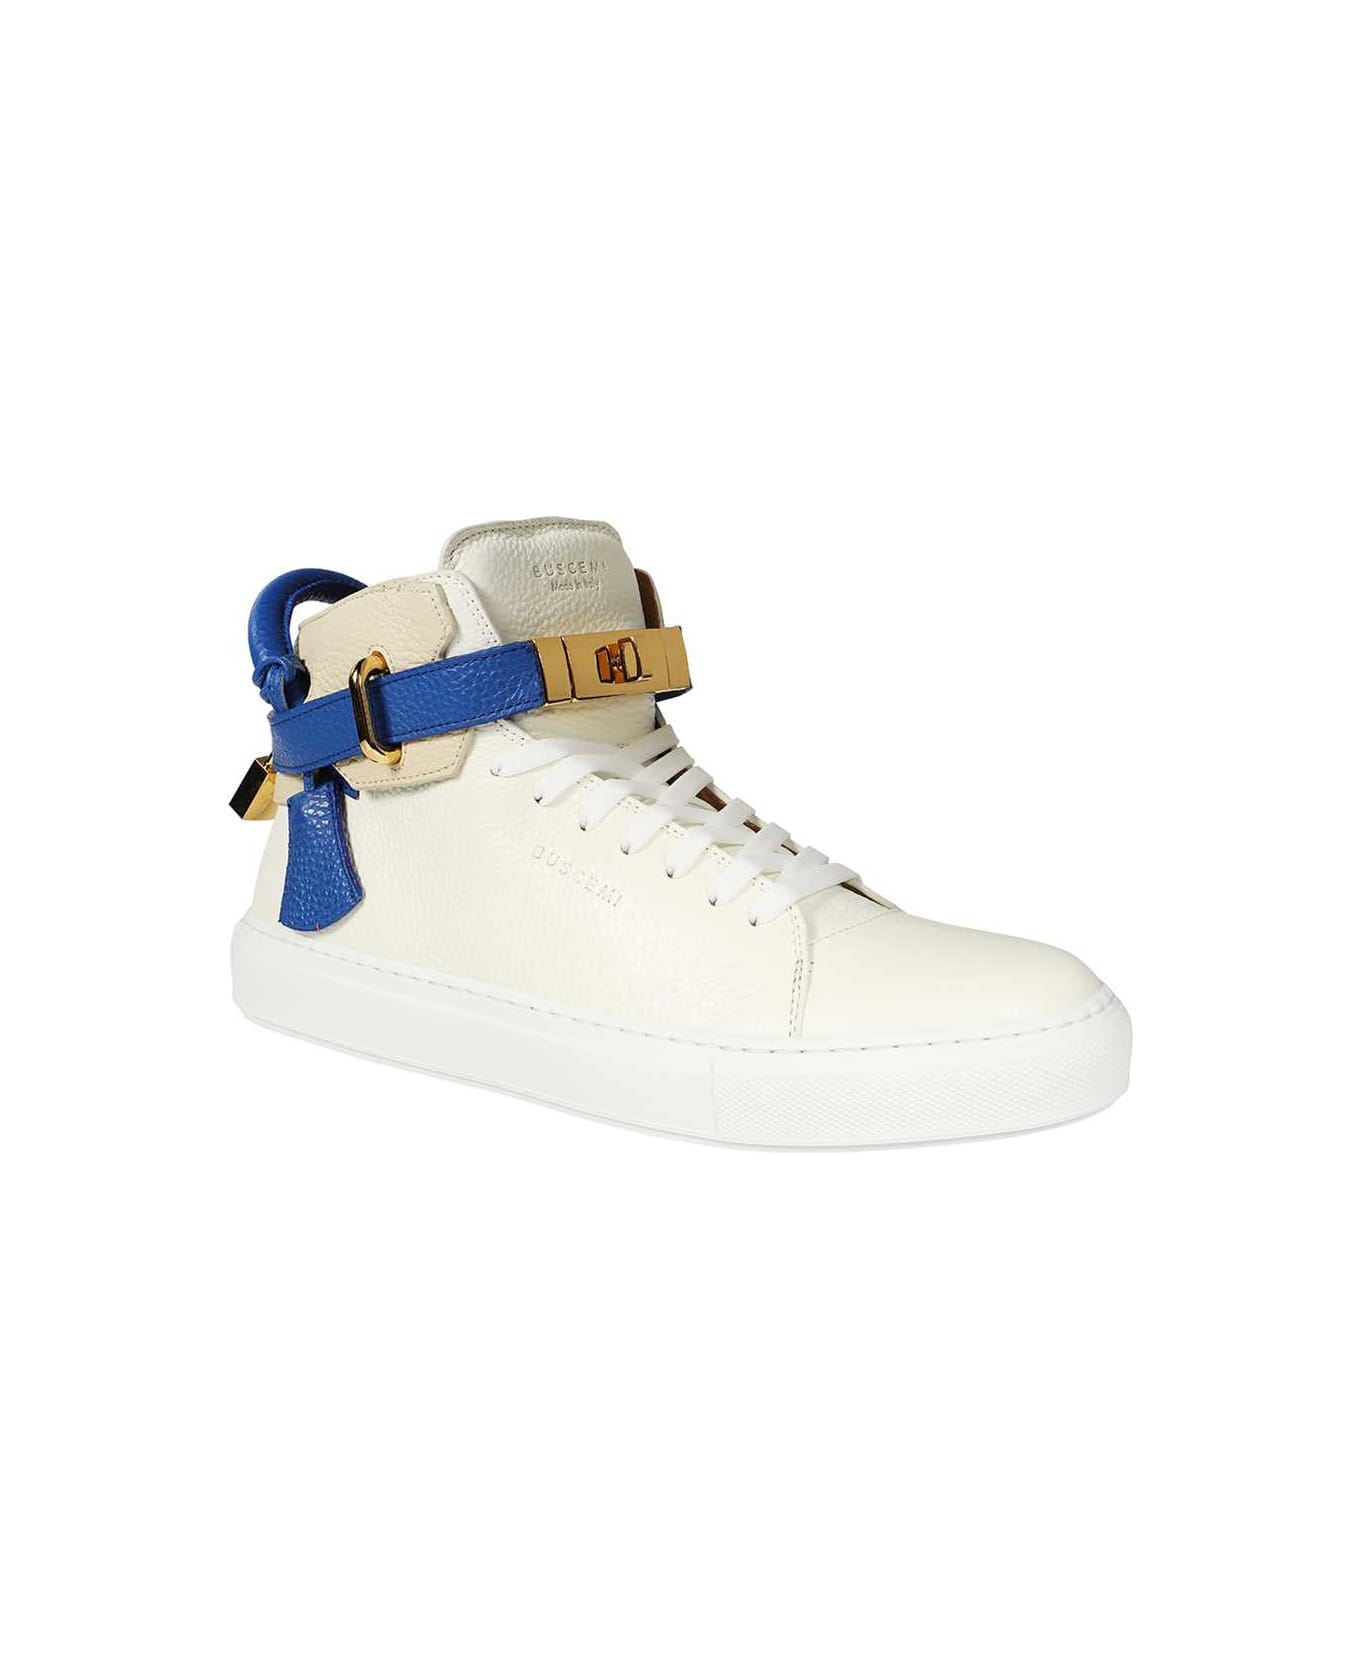 Buscemi Leather High-top Sneakers - White